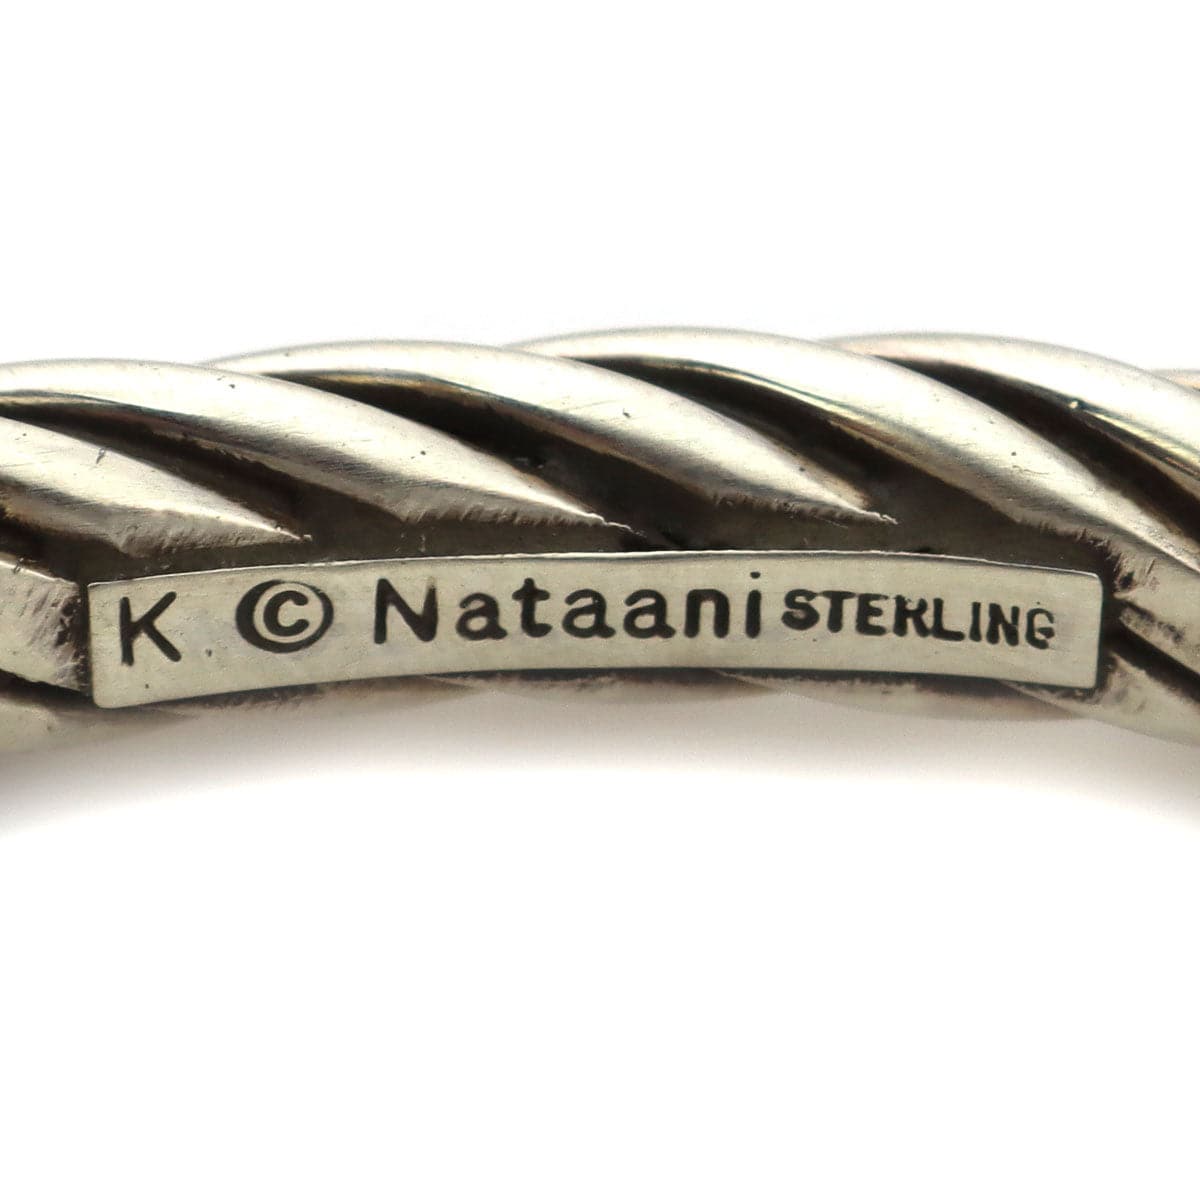 Kee (Karl) Nataani â€“ Navajo Sterling Silver Twisted Cable Design Bracelet with Turquoise on Terminals, Contemporary (J14184-002)5